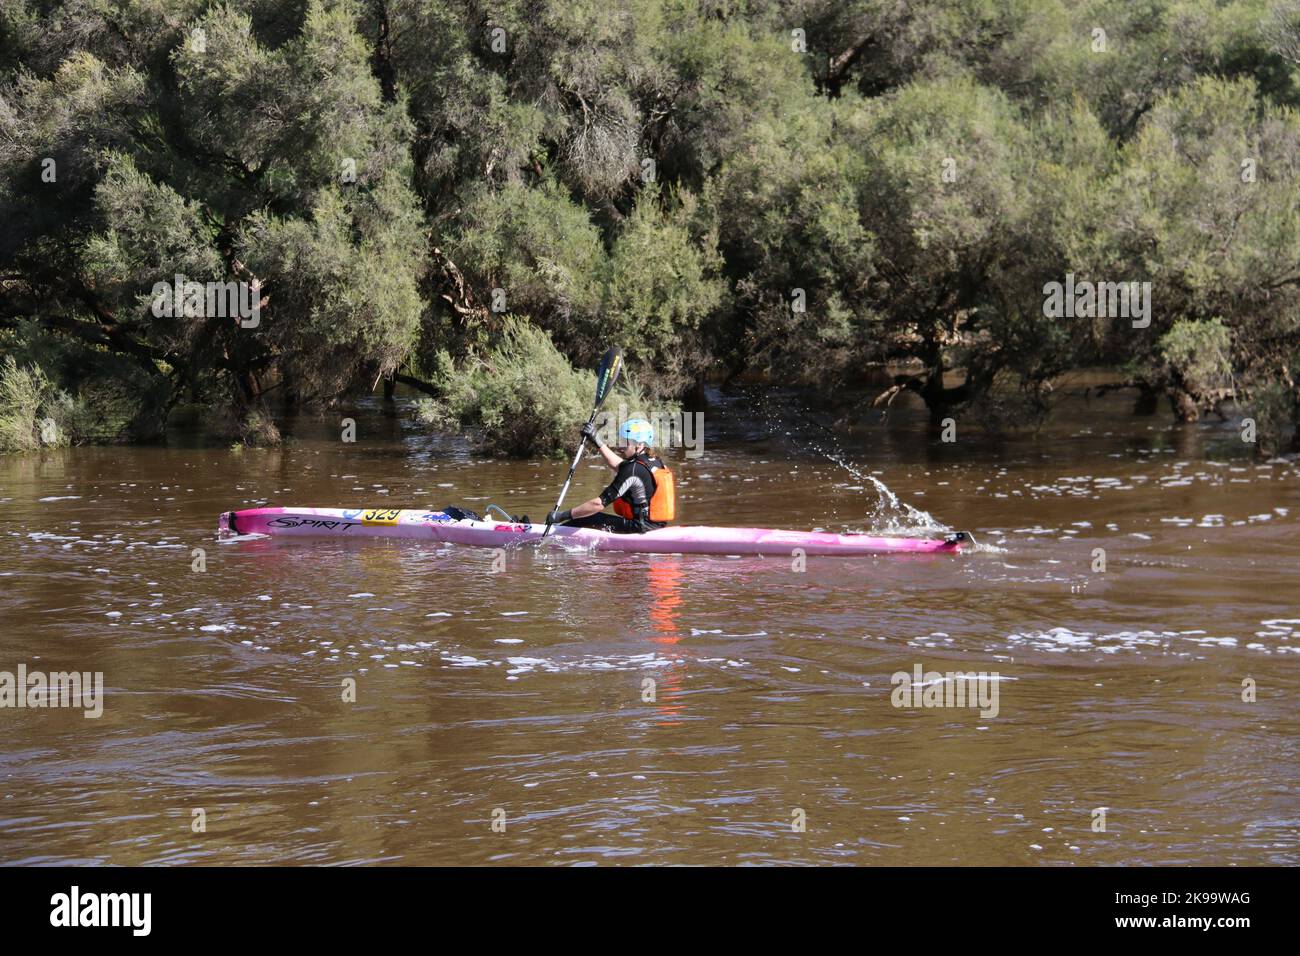 A protected competitor driving a boat on a river Stock Photo